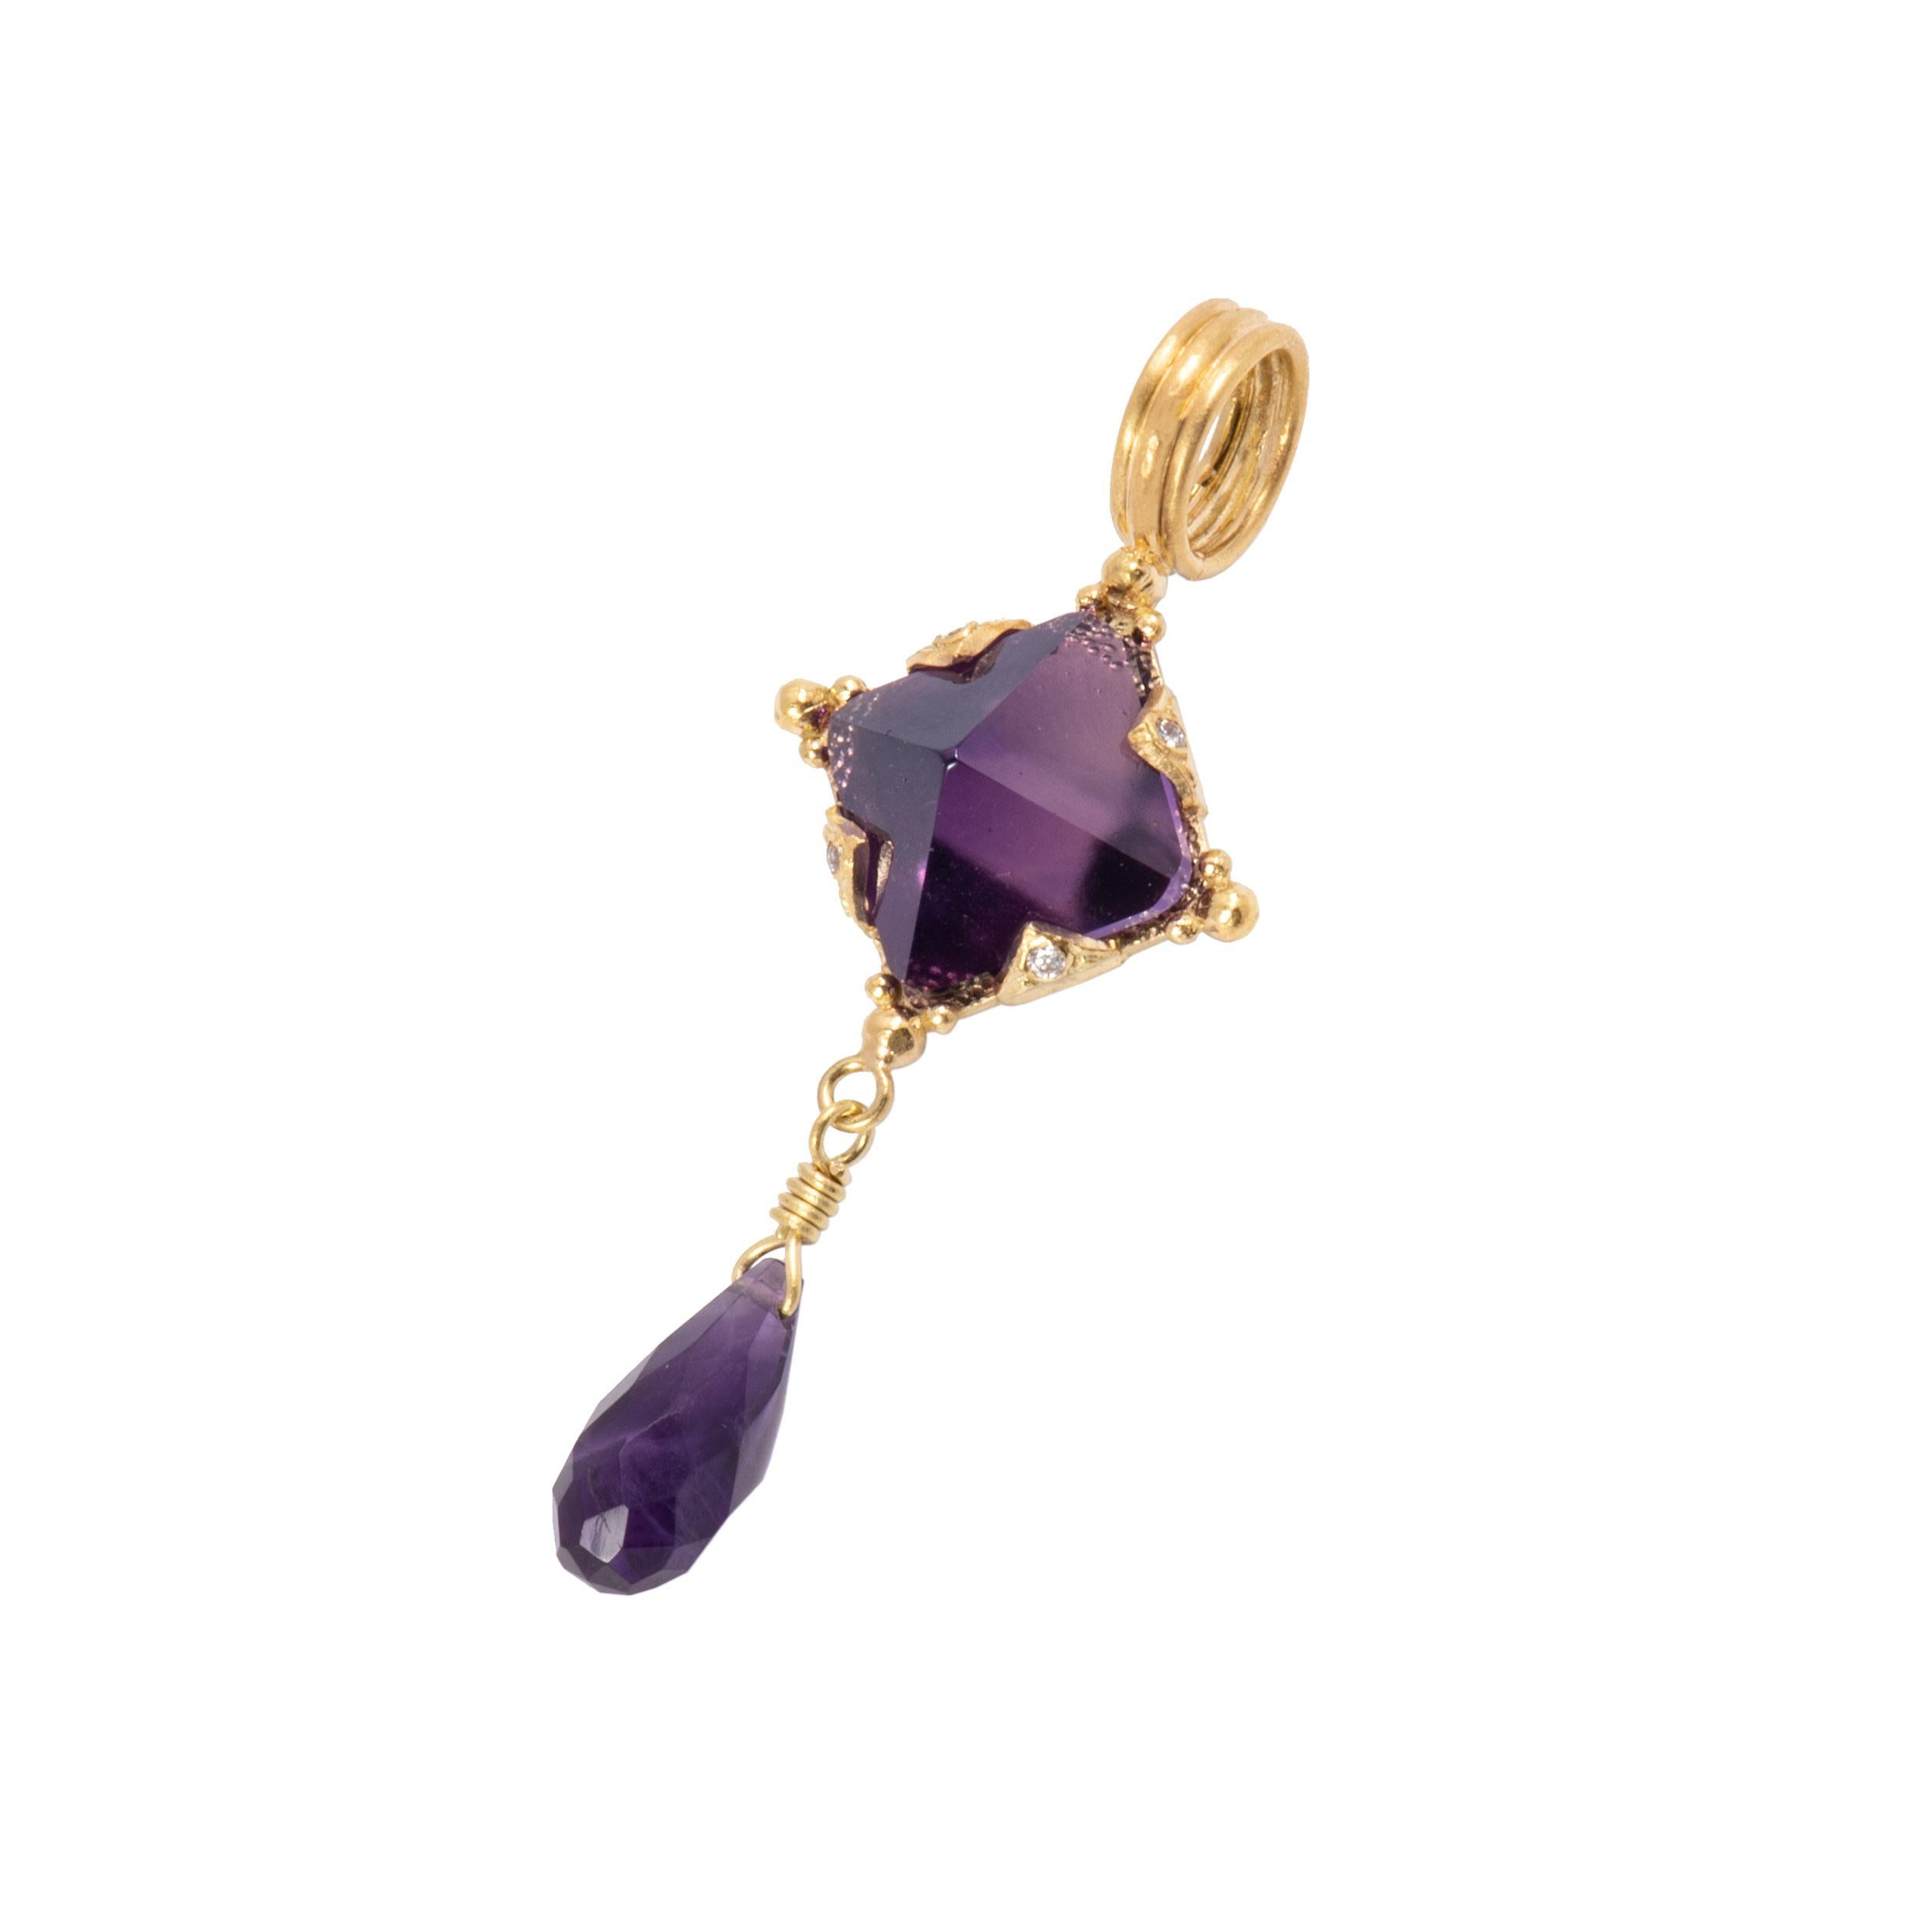 The Amethyst Pyramid Pendant in 18 Karat Gold features a deeply colored stone with 4 facets that catch and reflect the light like window panes. Set in 18k gold with beading, and decorative settings set with 4 sparkling round white diamonds, the